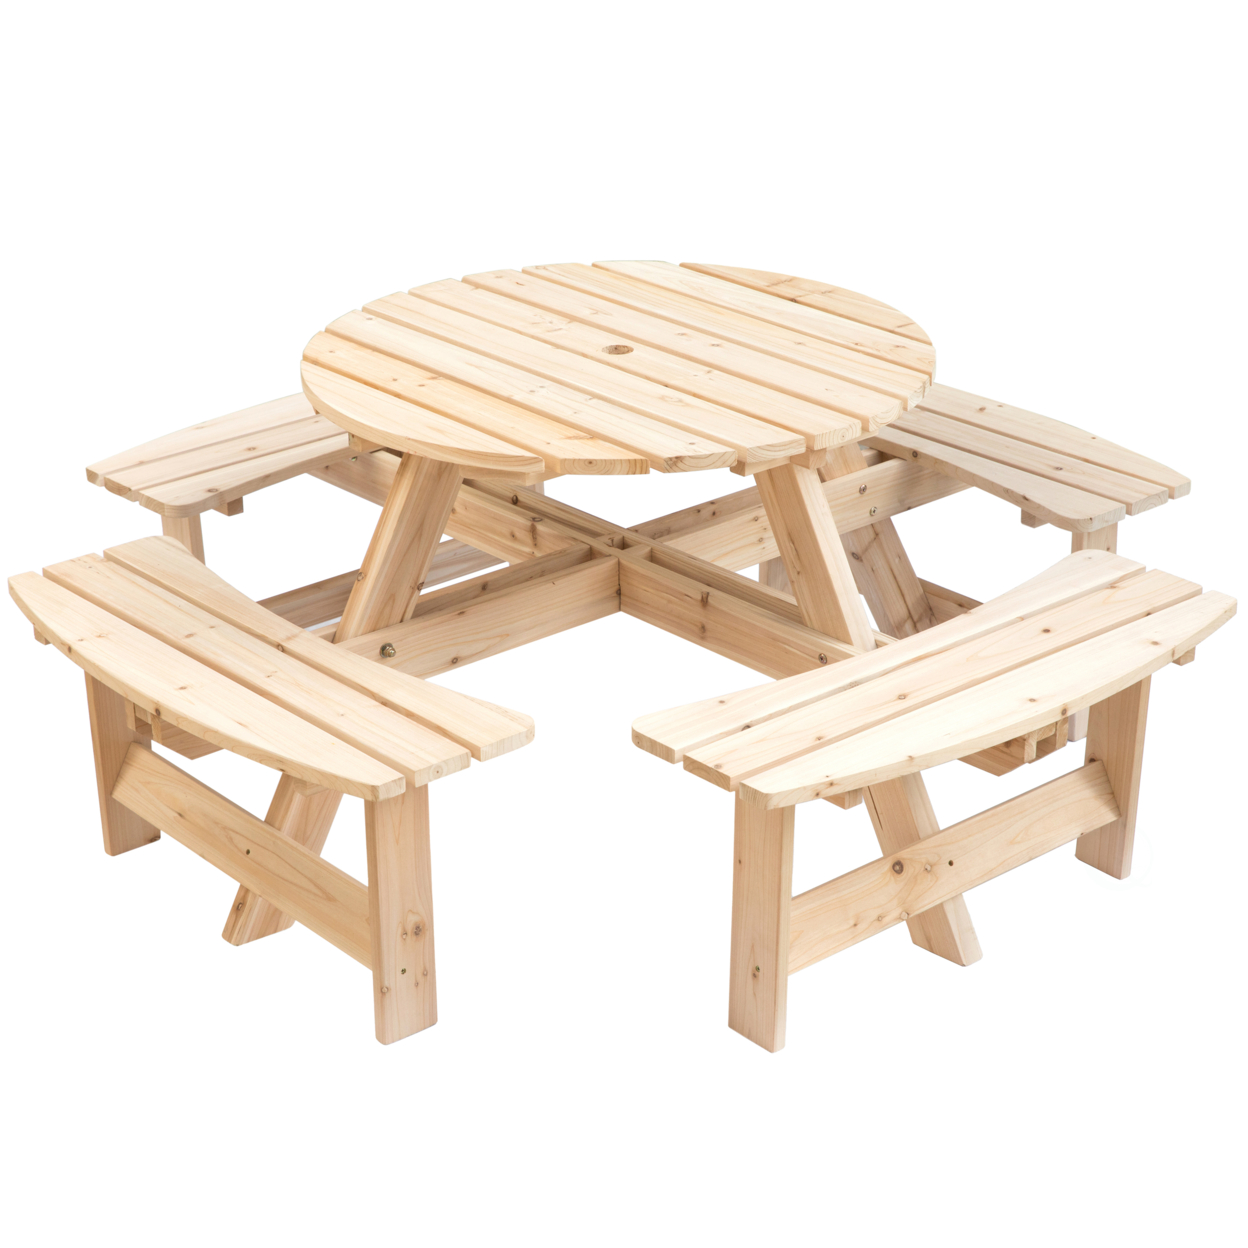 Wooden Outdoor Patio Garden Round Picnic Table with Bench, 8 Person - image 1 of 10